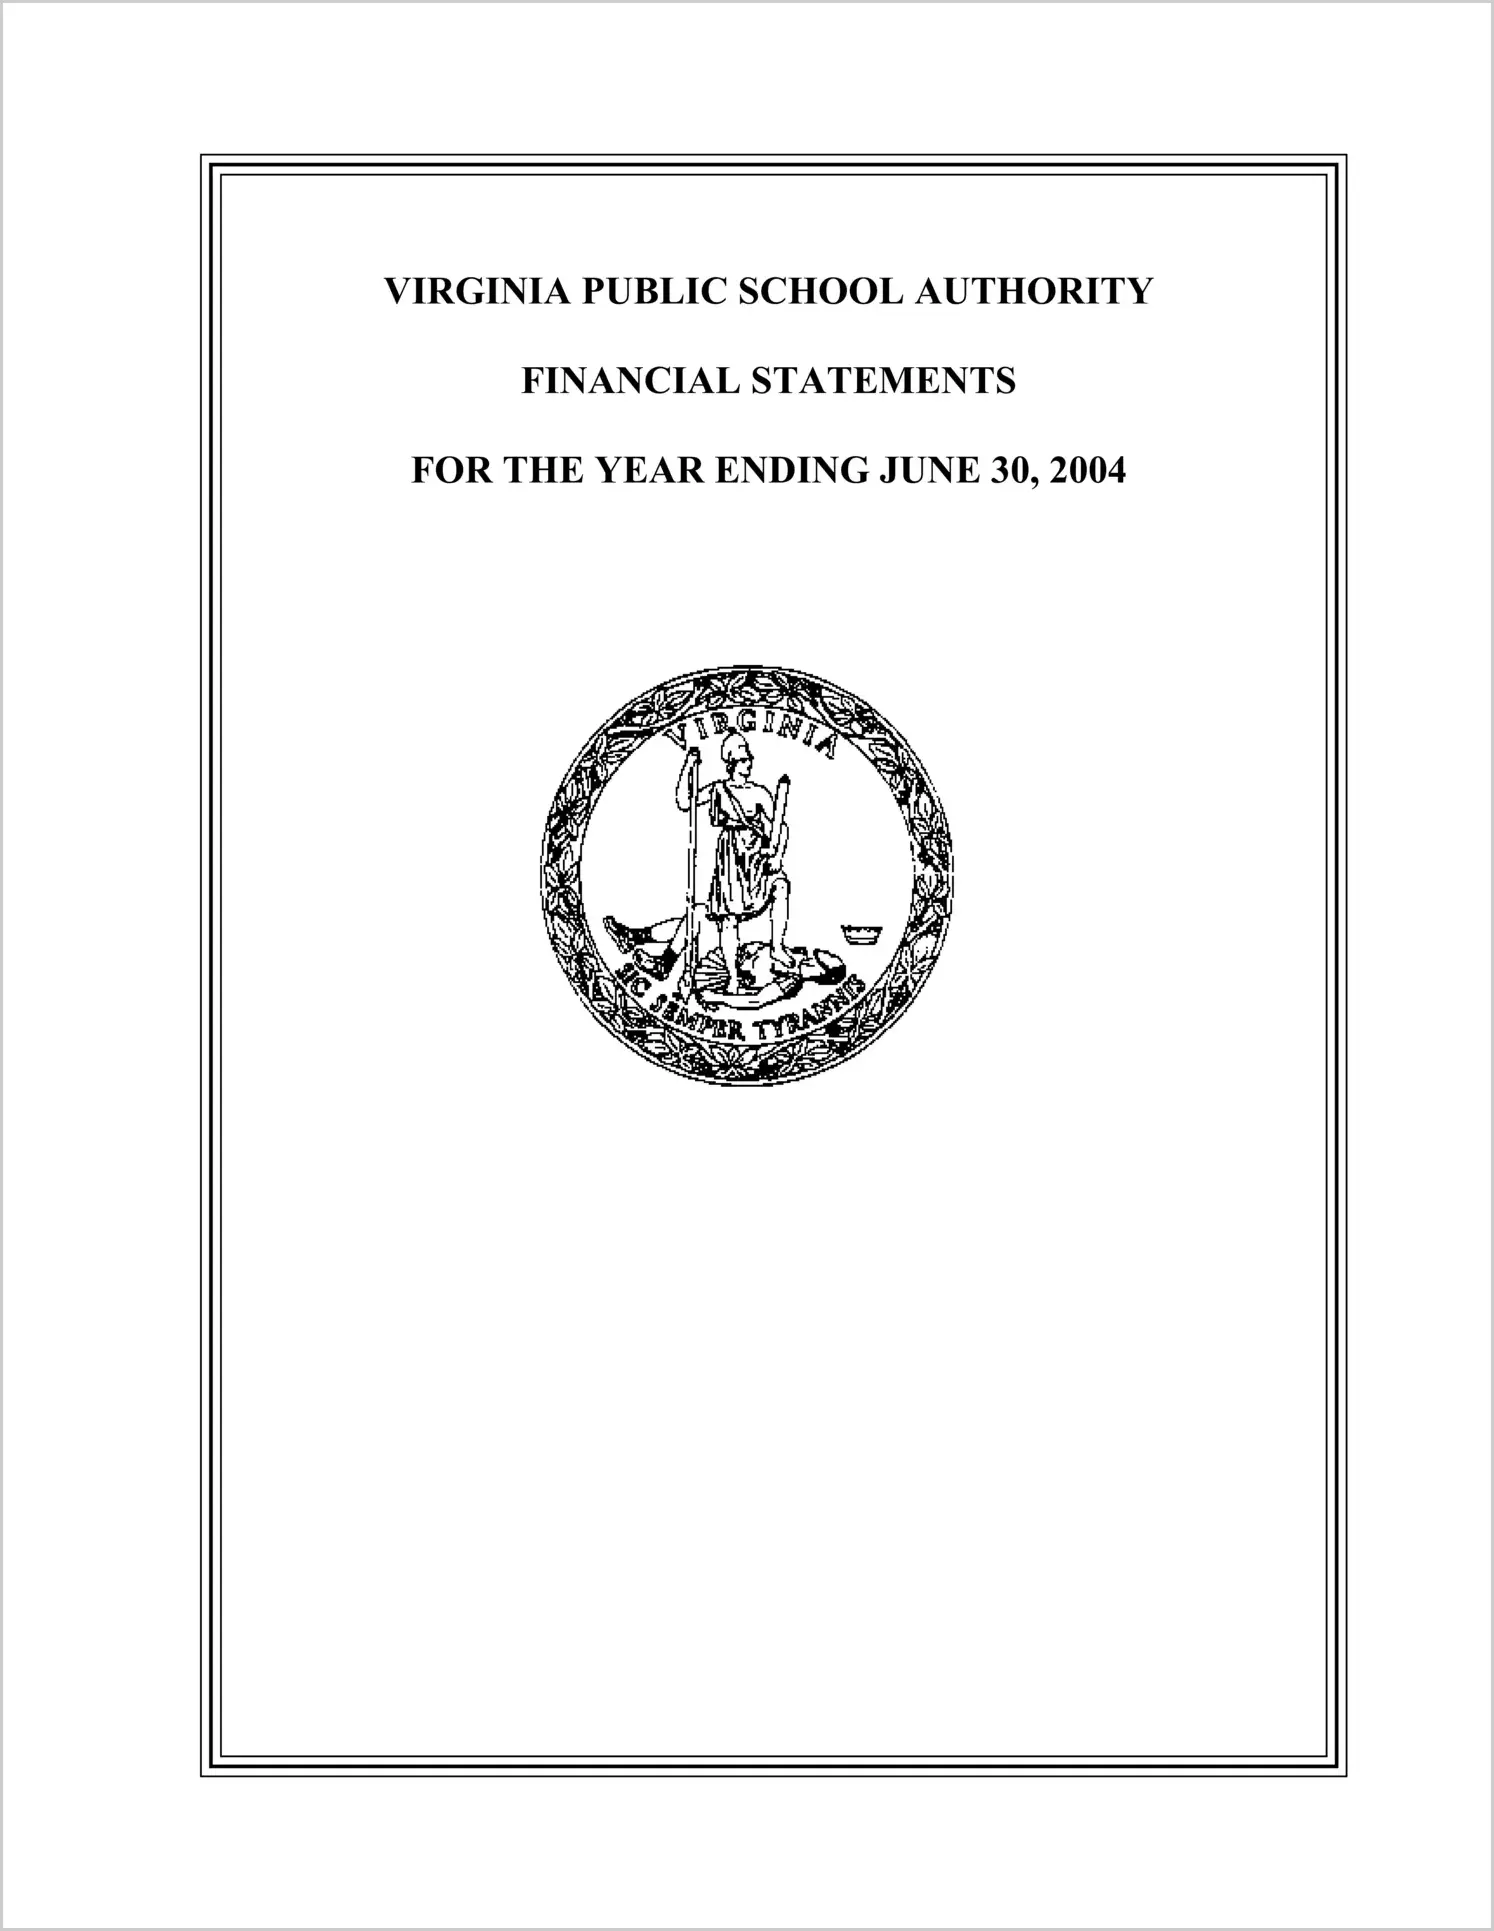 Virginia Public School Authority Financial Statements for the year ended June 30, 2004